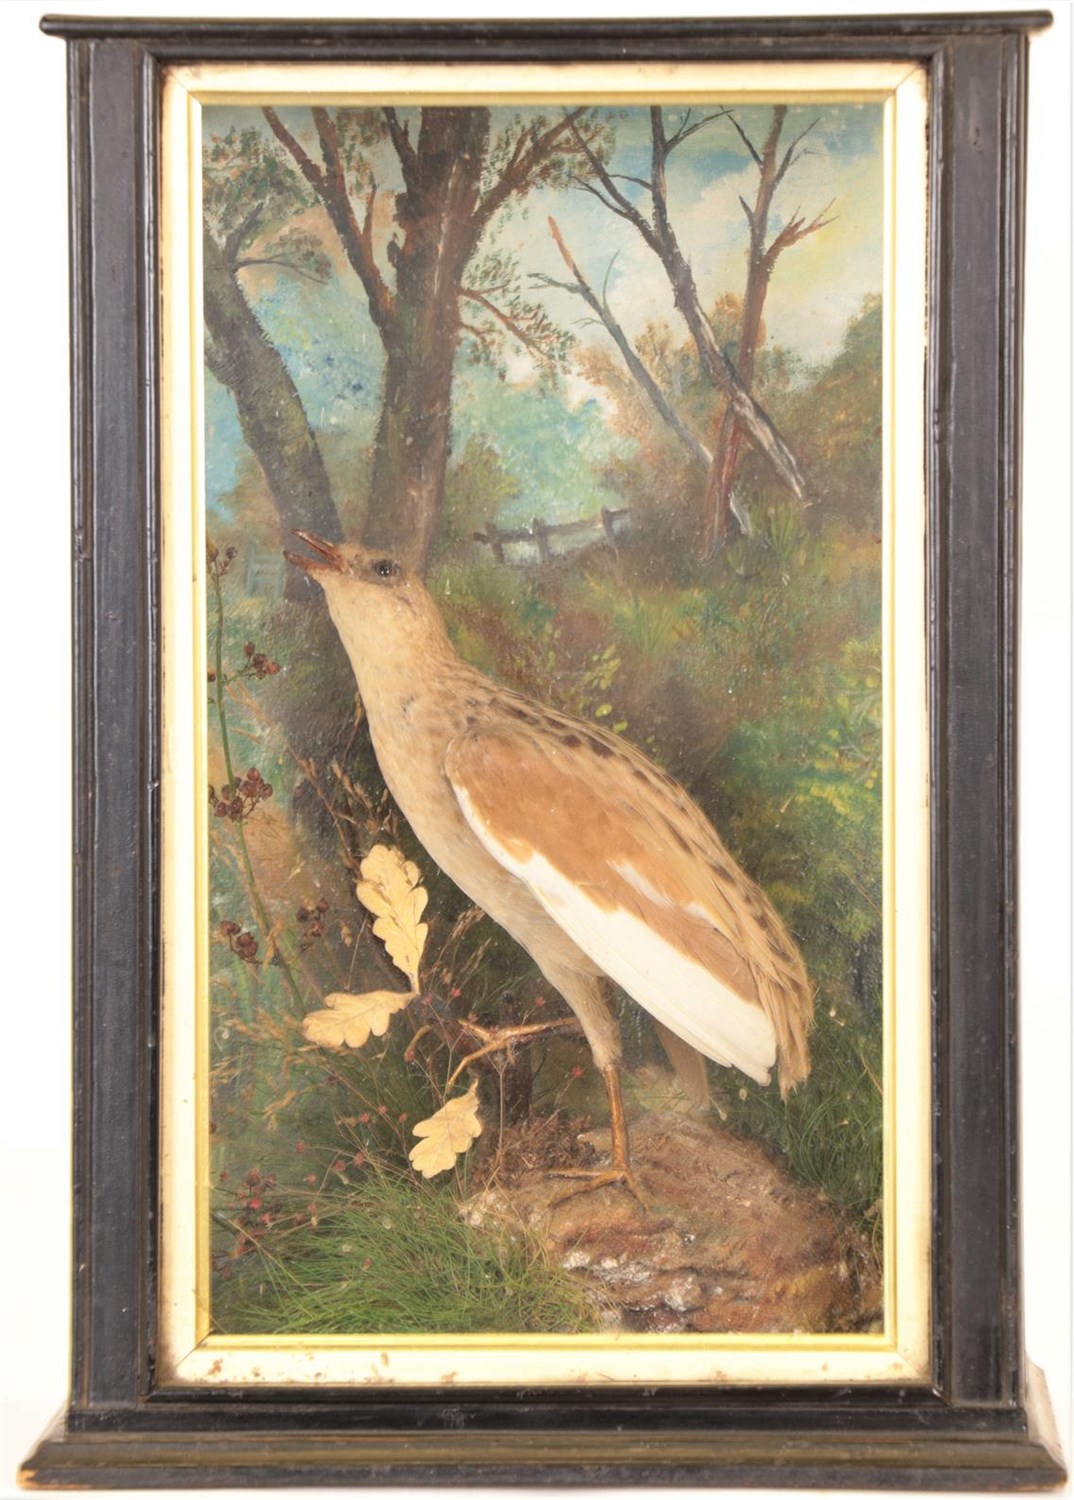 Lot 139 - Taxidermy: A Cased Corncrake (Crex crex), circa early 20th century, a full mount adult stood upon a